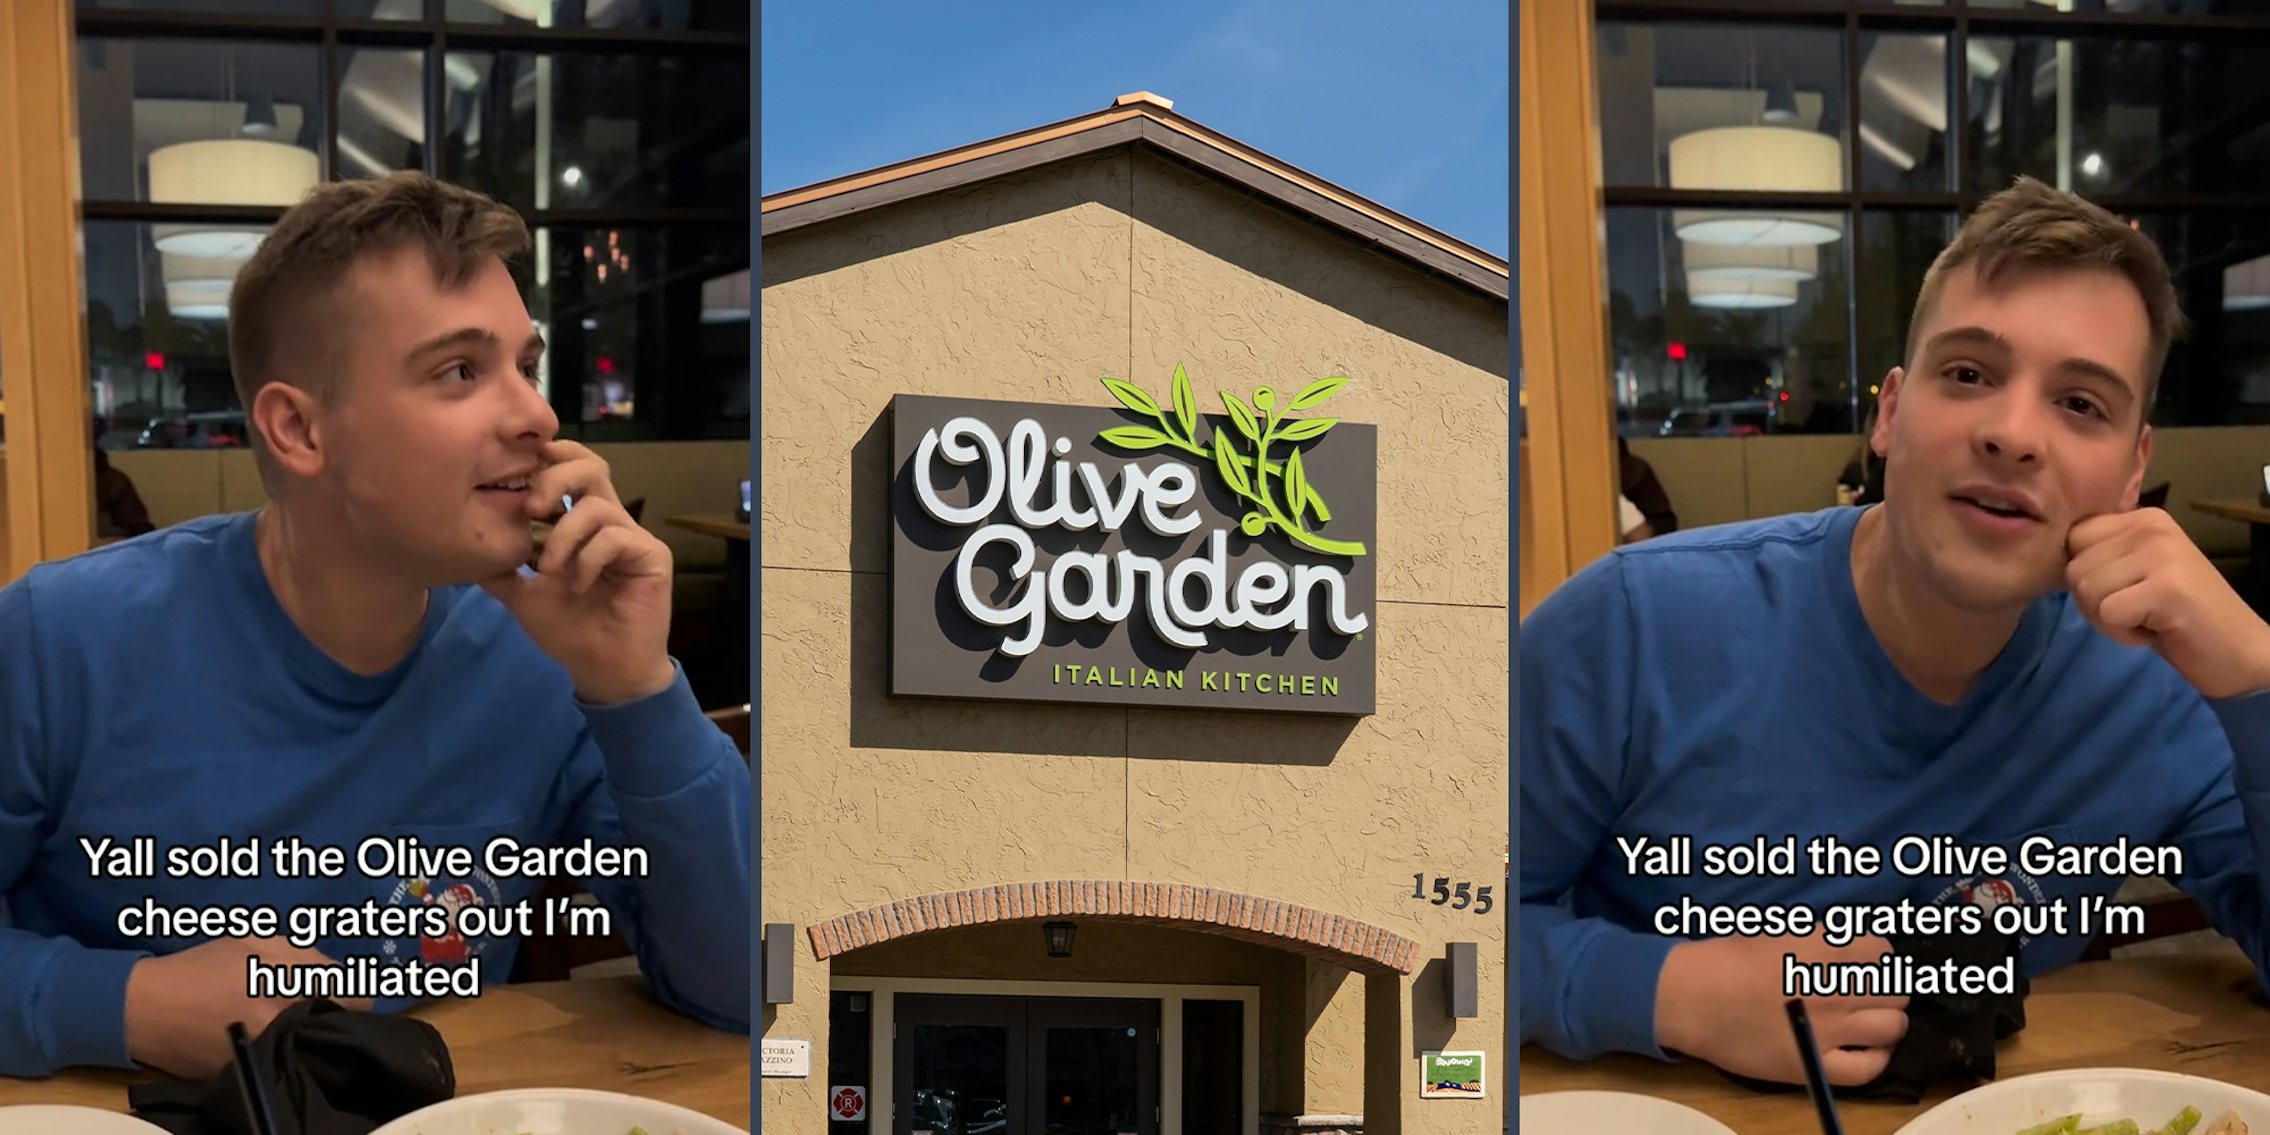 Man Tries To Order Cheese Grater From Olive Garden. It's a Fail